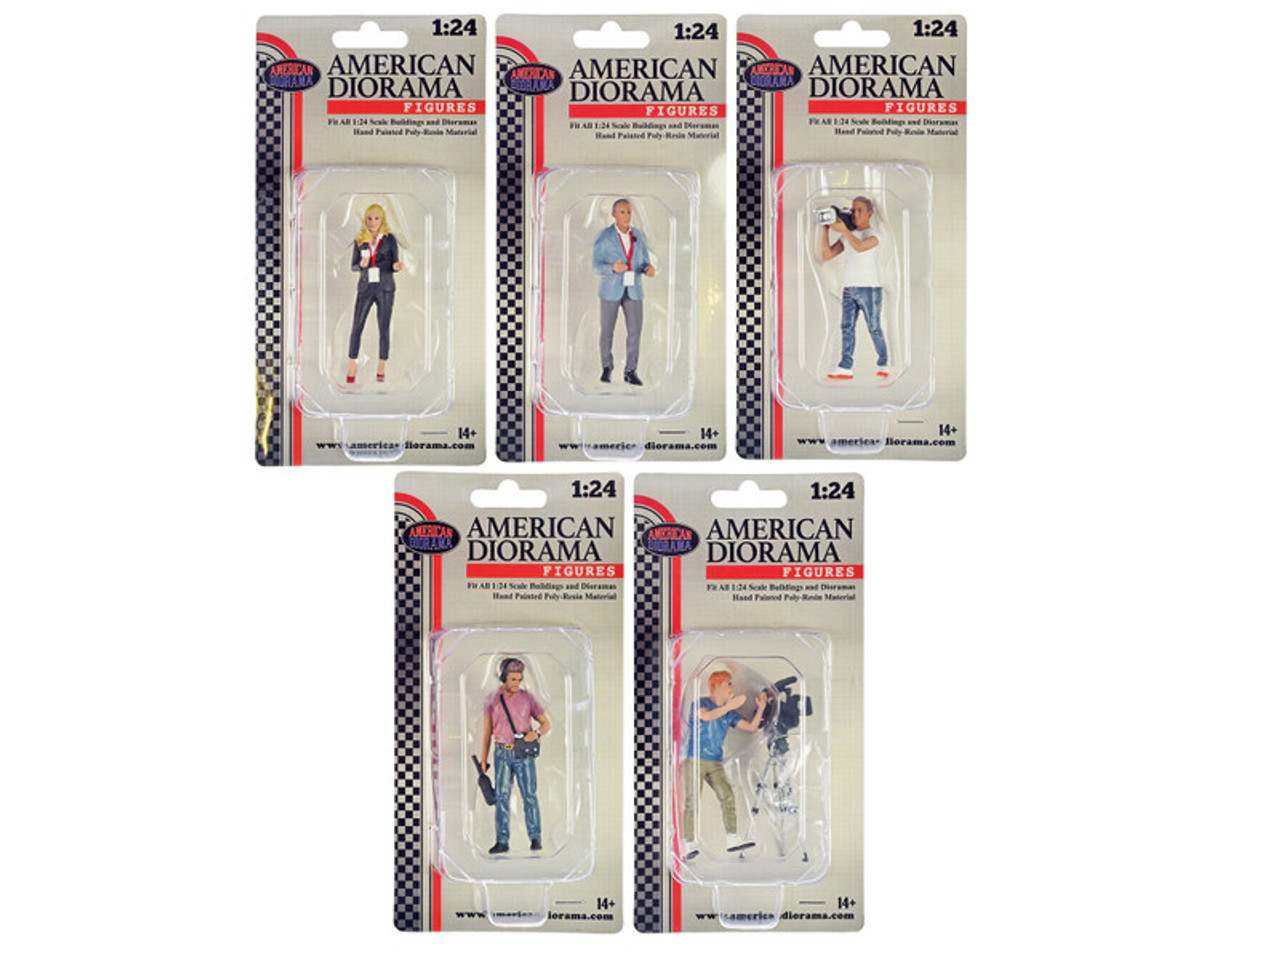 "On-Air" 6 piece Figures and Accessory Set for 1/24 Scale Models by American Diorama